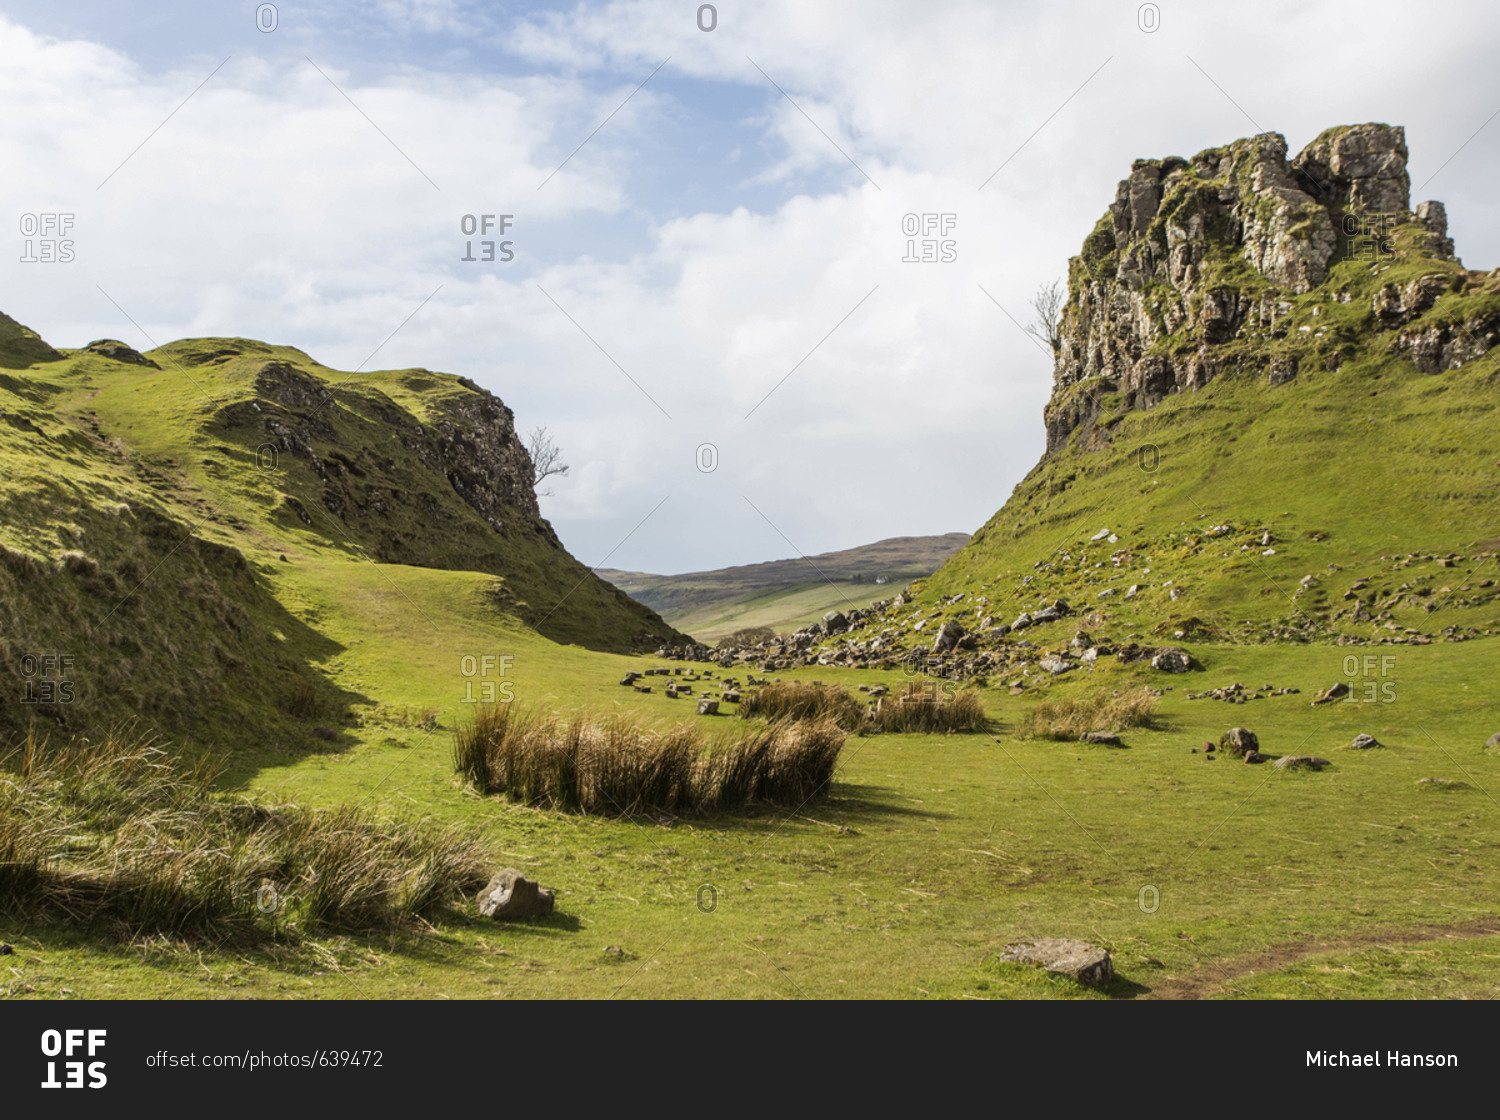 Fairy Glen is a popular tourist destination on the northern side of the Isle of Skye, Scotland